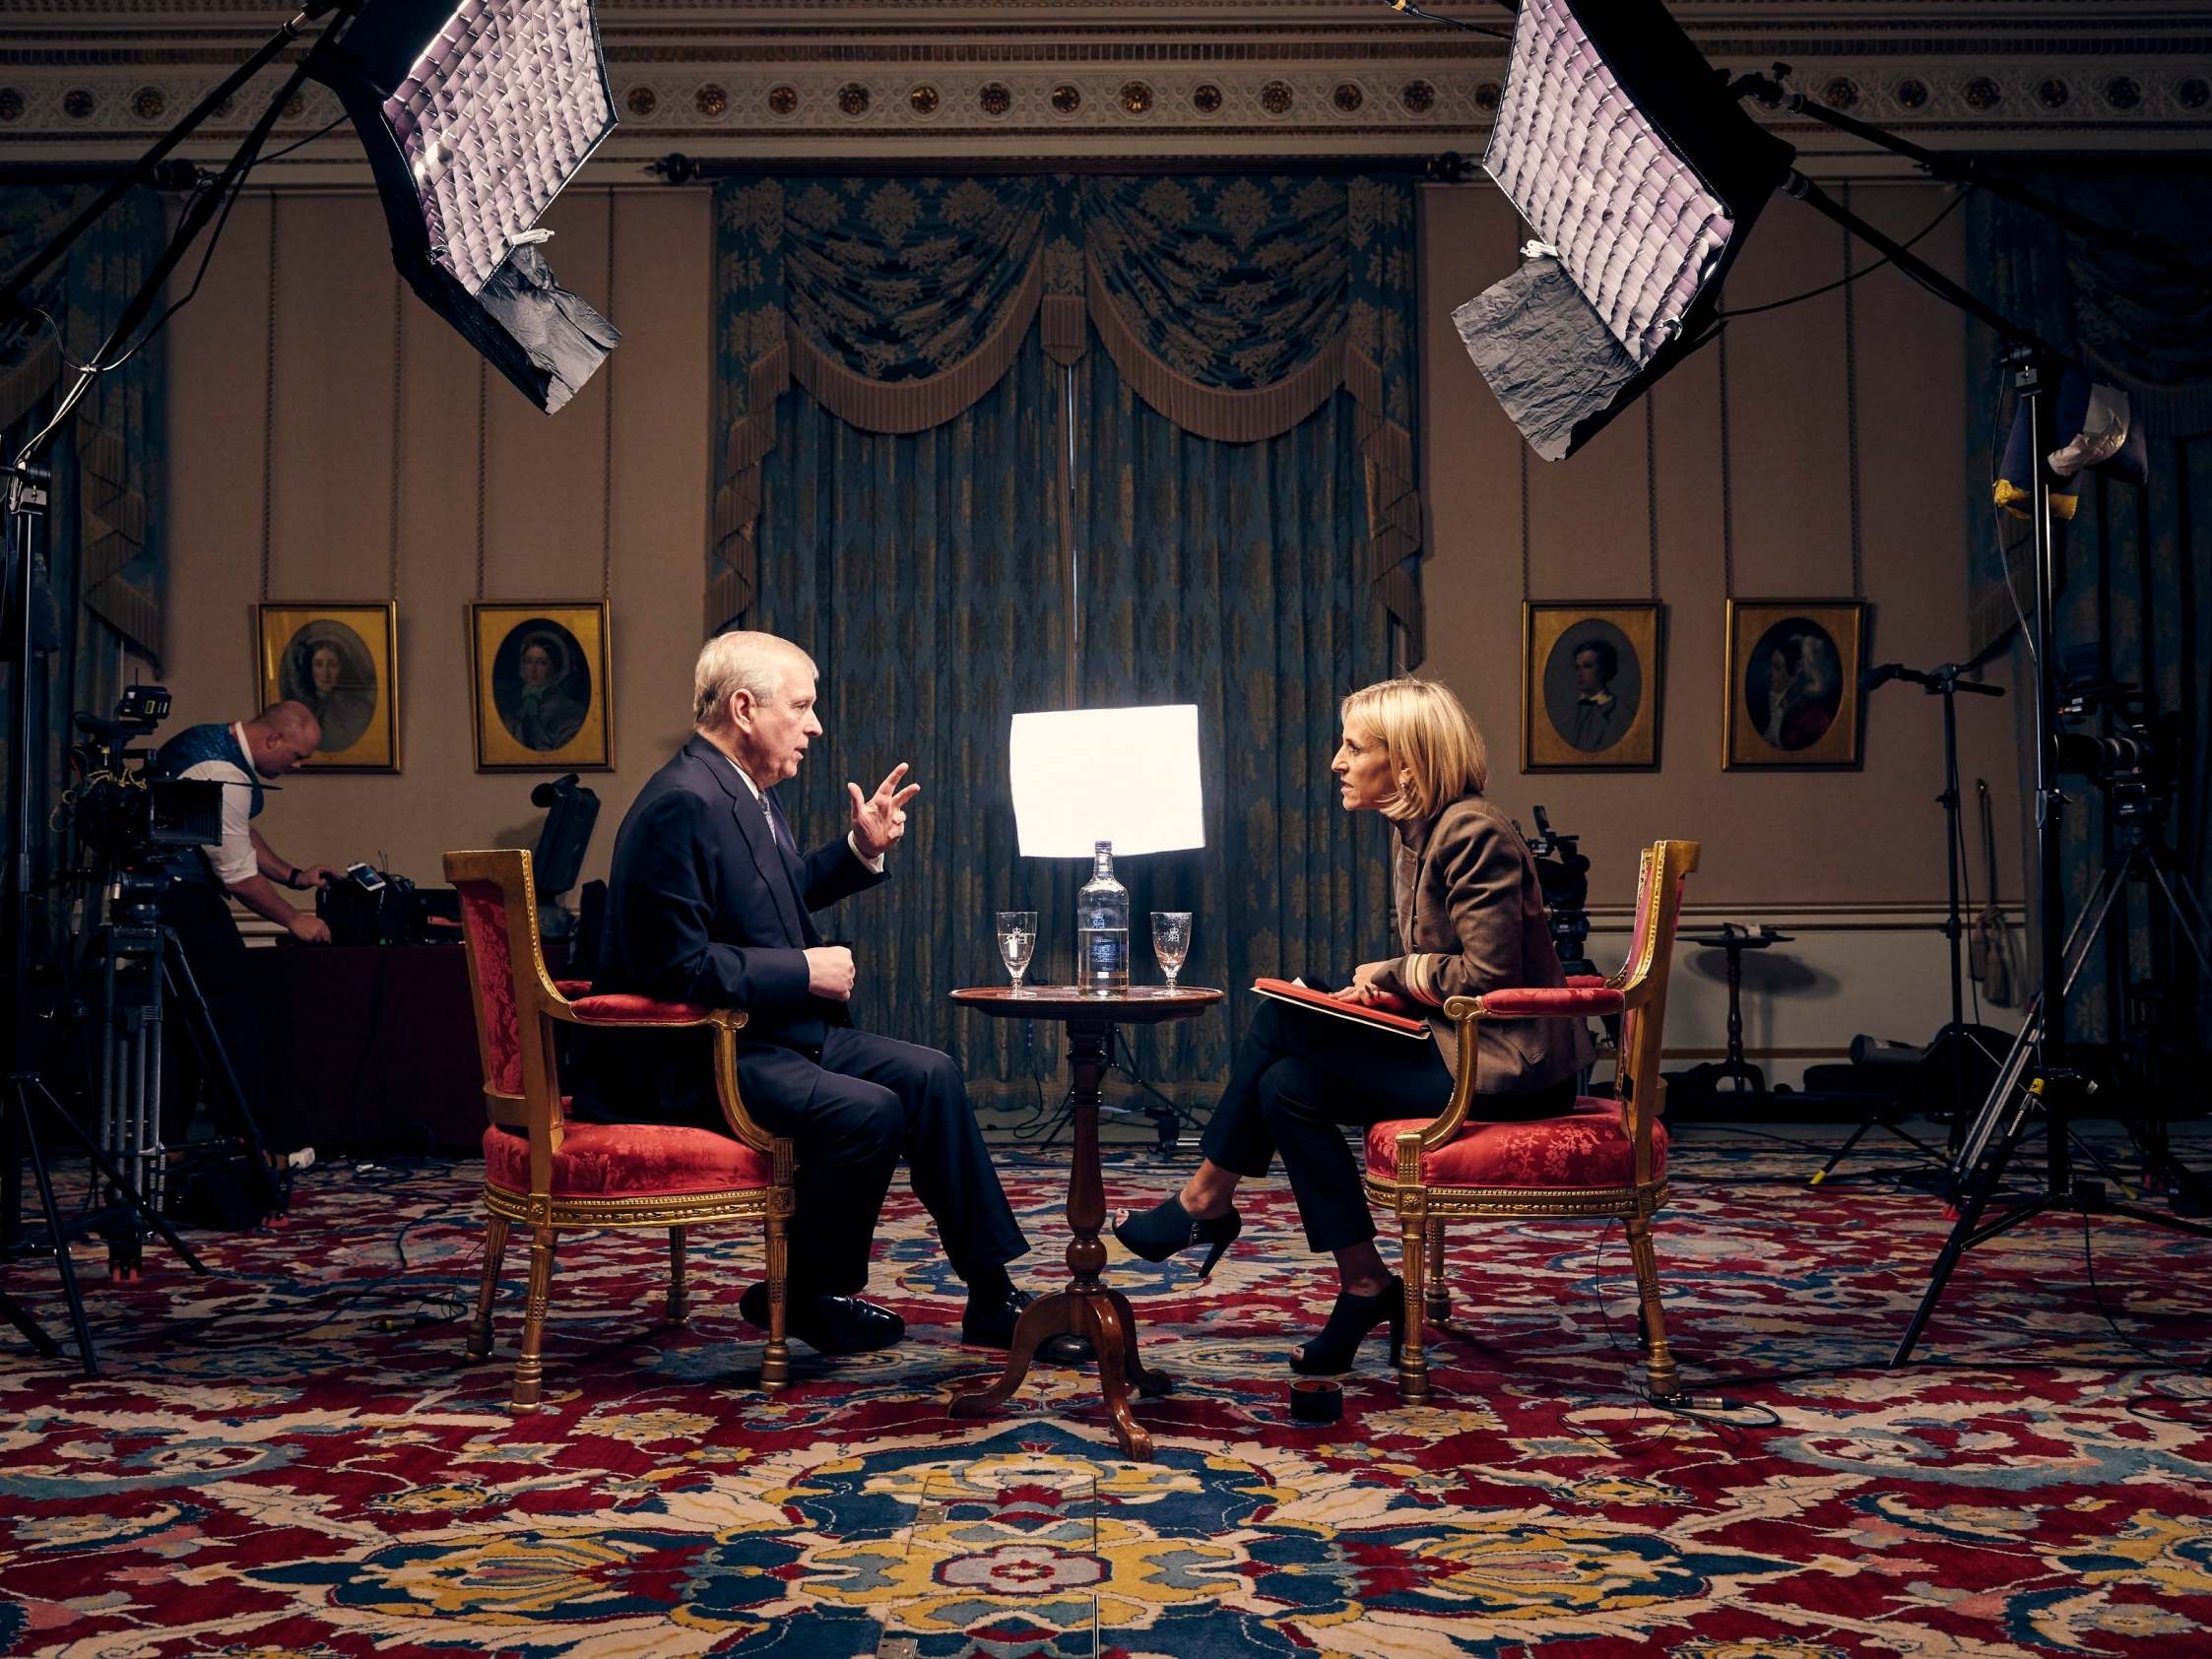 Maitlis has since described her incredulity at the prince’s conduct in the interview